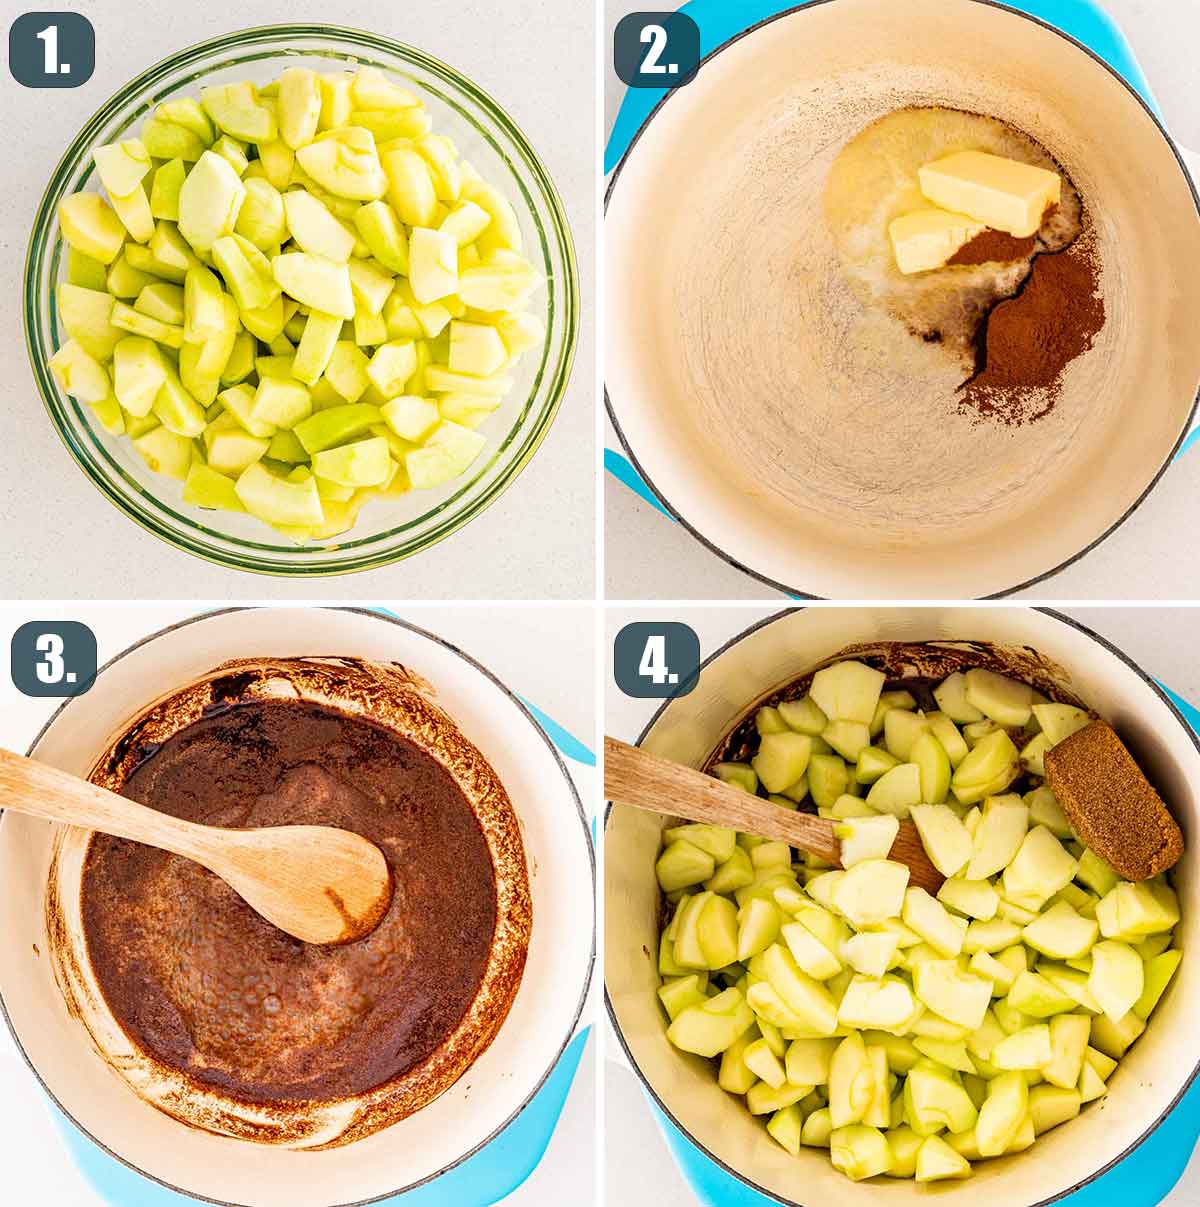 process shots showing how to make apple pie filling.